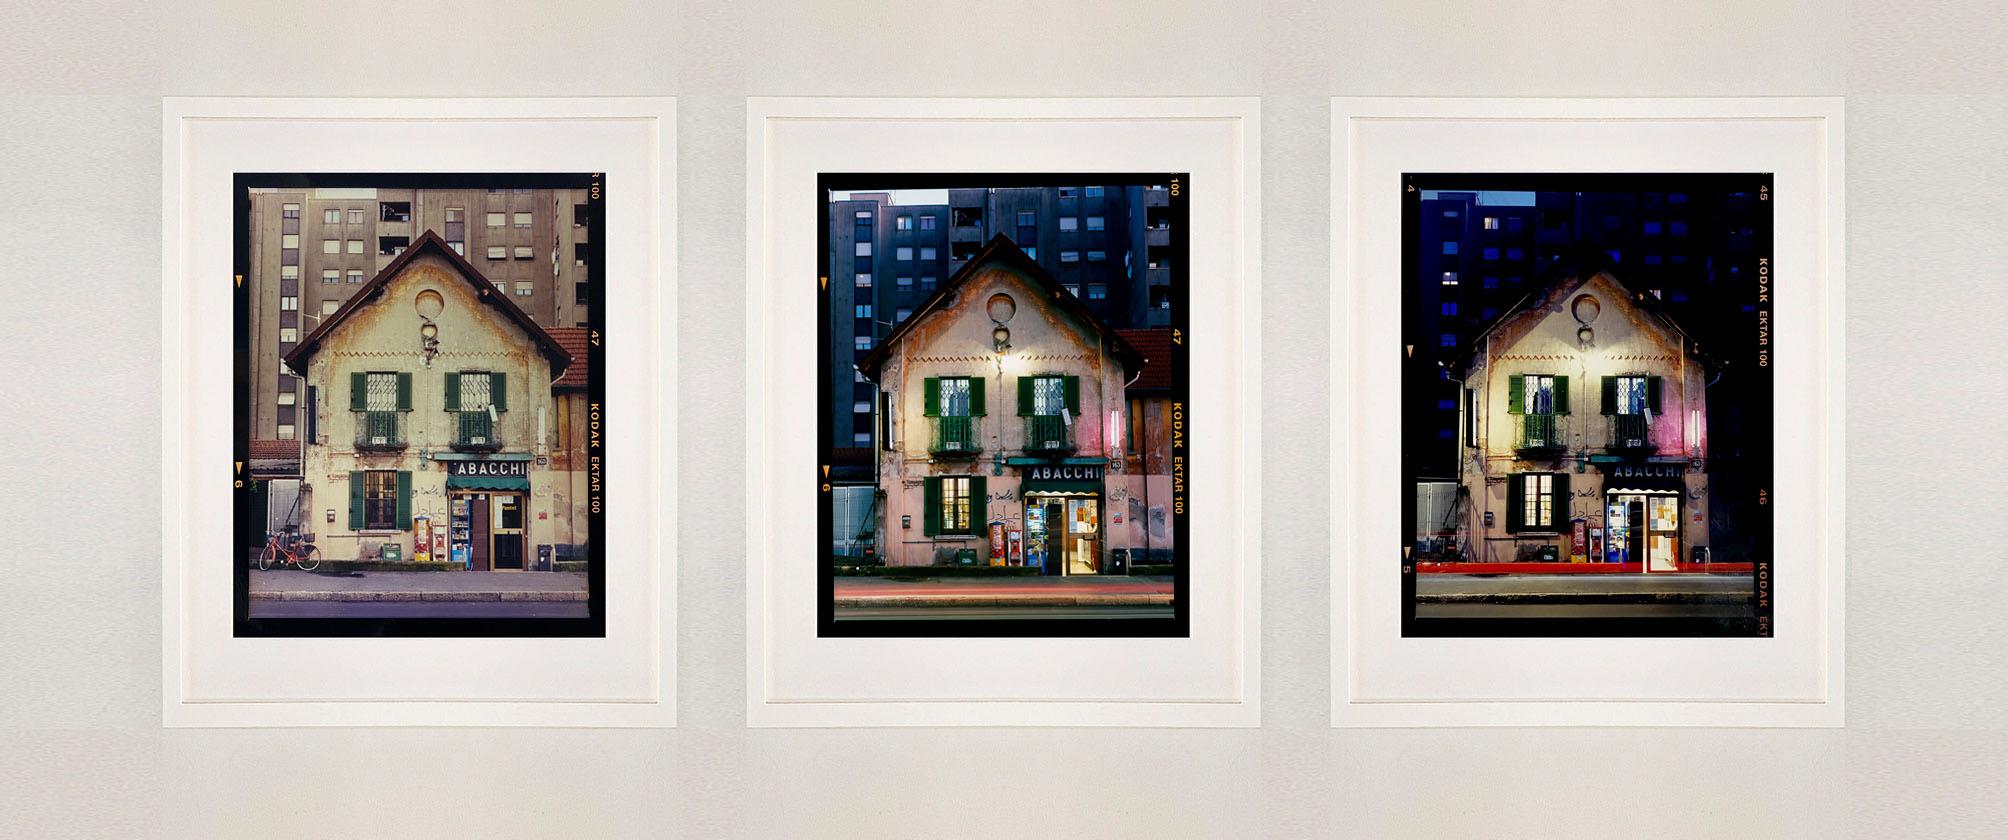 TABACCHI, photographs from Richard Heeps series, 'A Short History of Milan'.
Captivated by the unusual architecture on this street in Milan, Richard spent four hours photographing it. This set of three framed artworks captures the sense of the